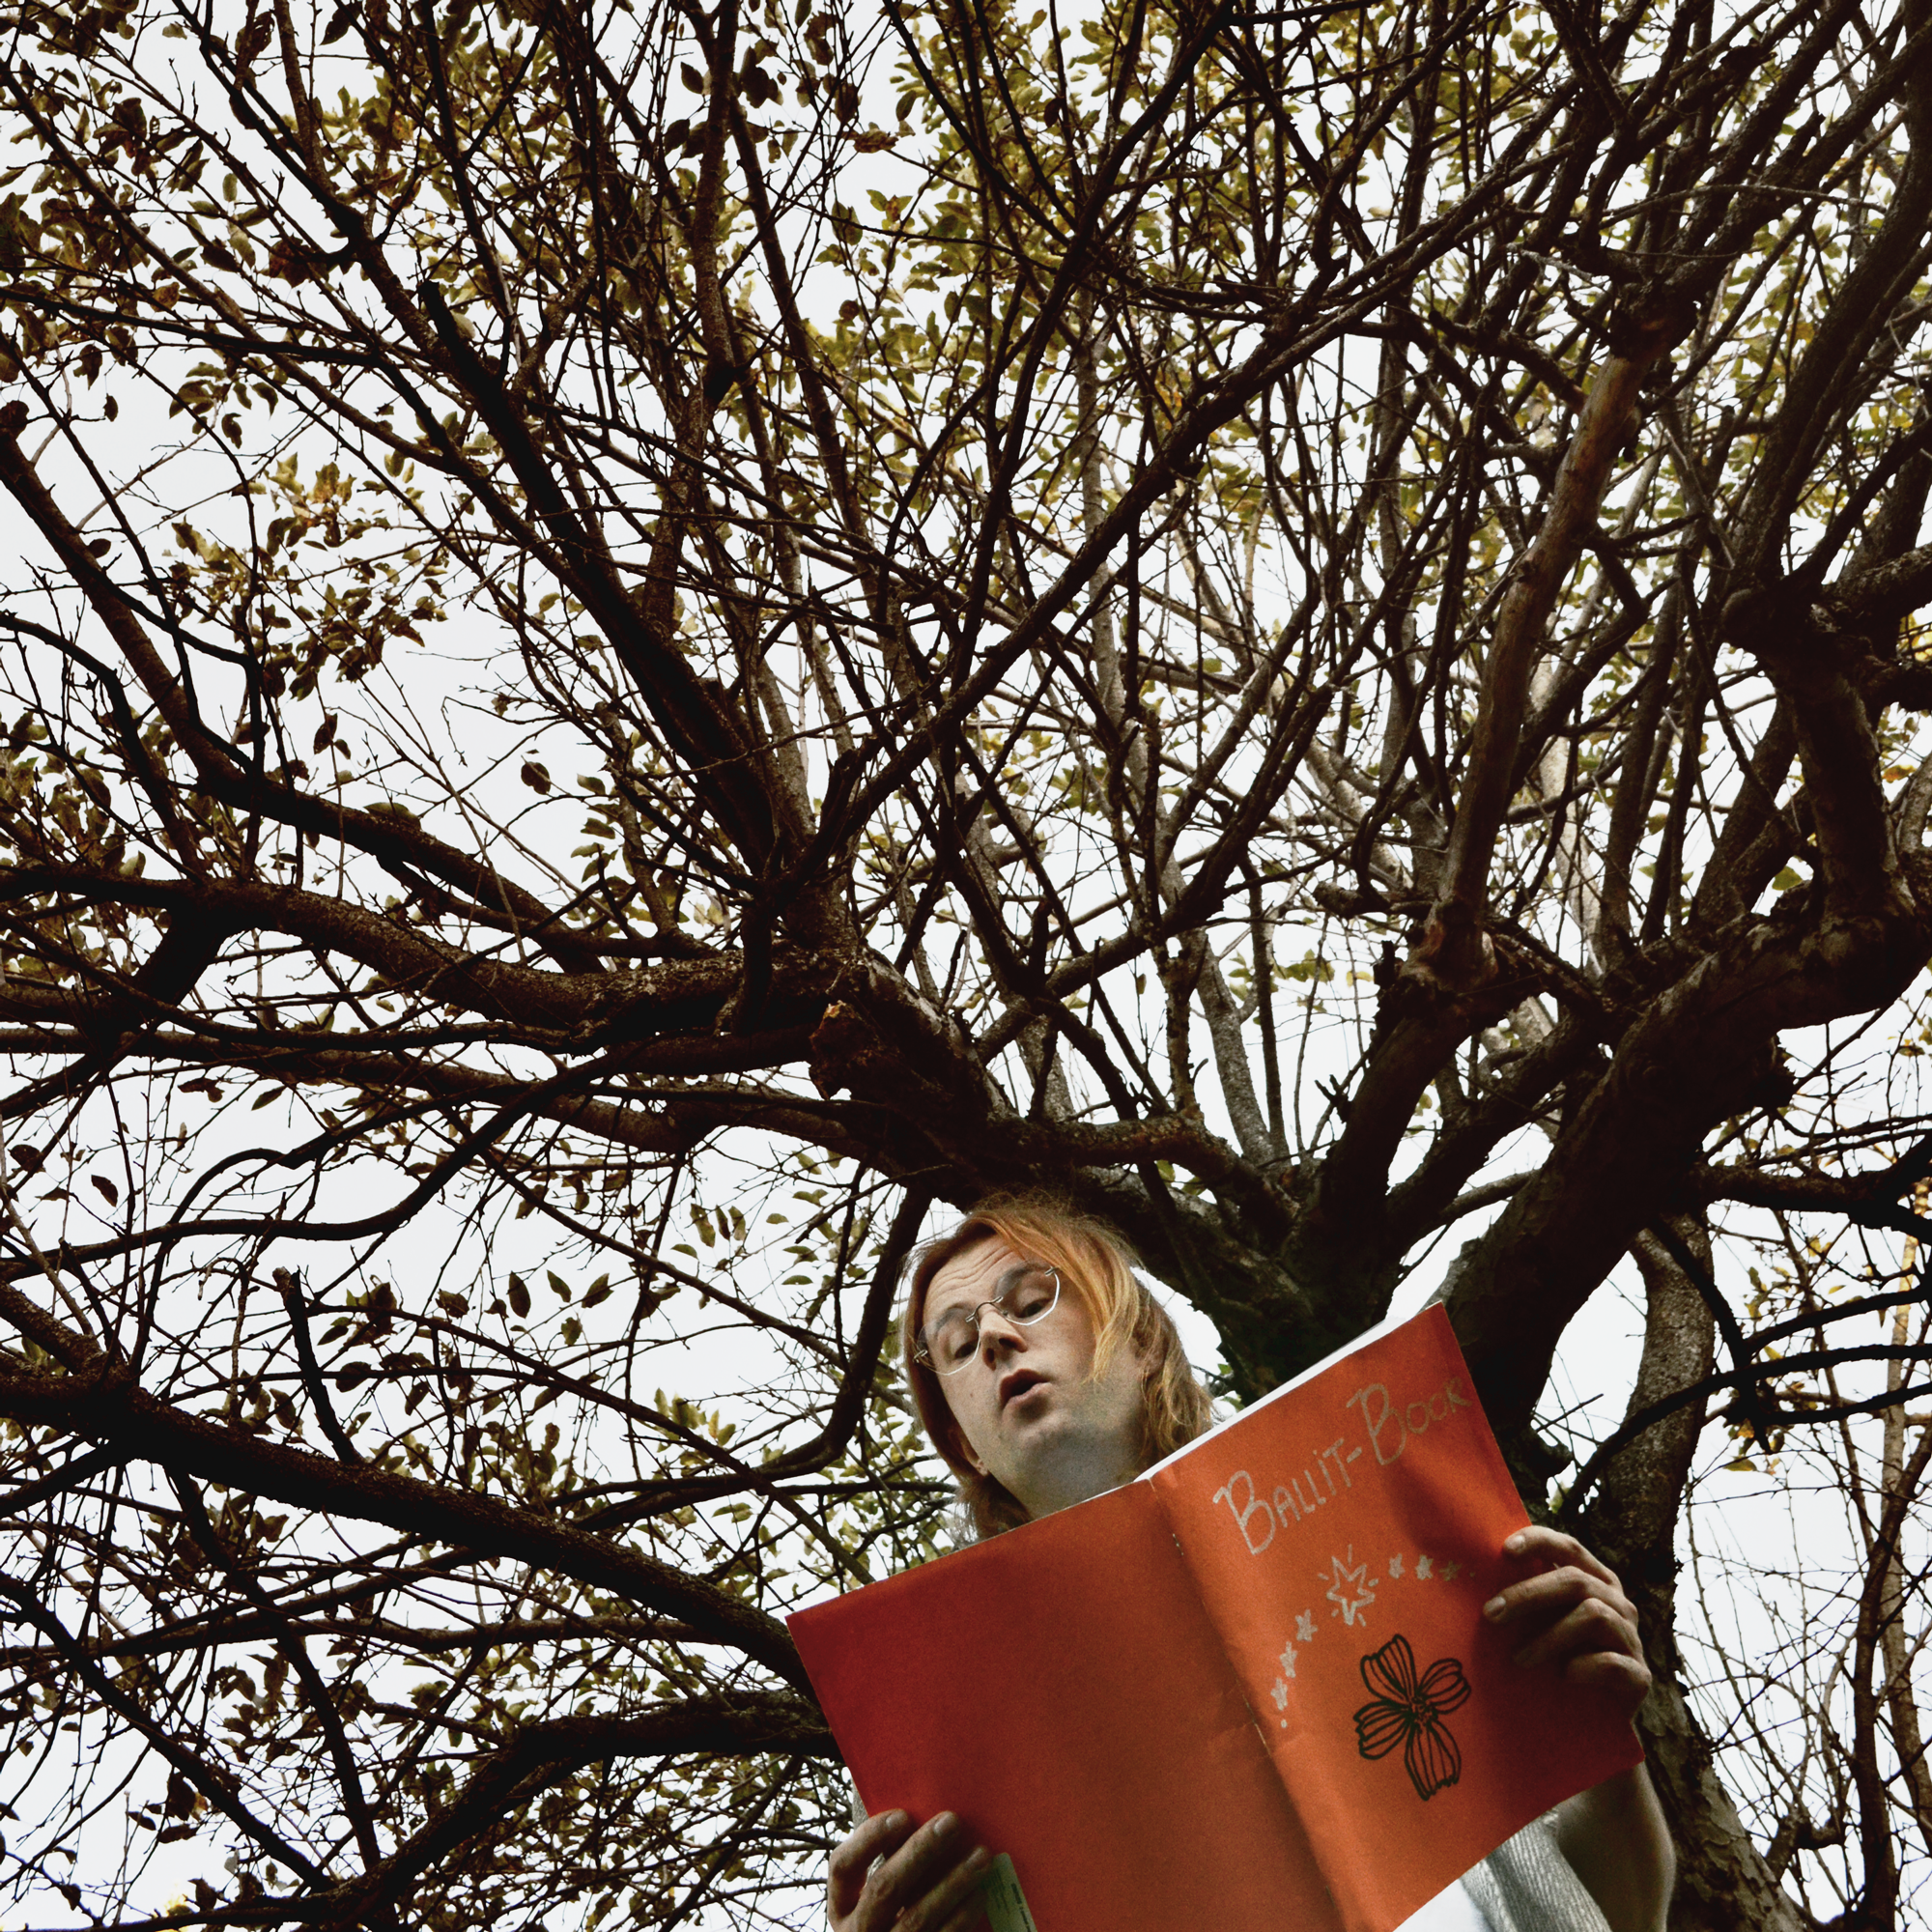 Photo of Derek Piotr reading from a large red book beneath the branches of a tree